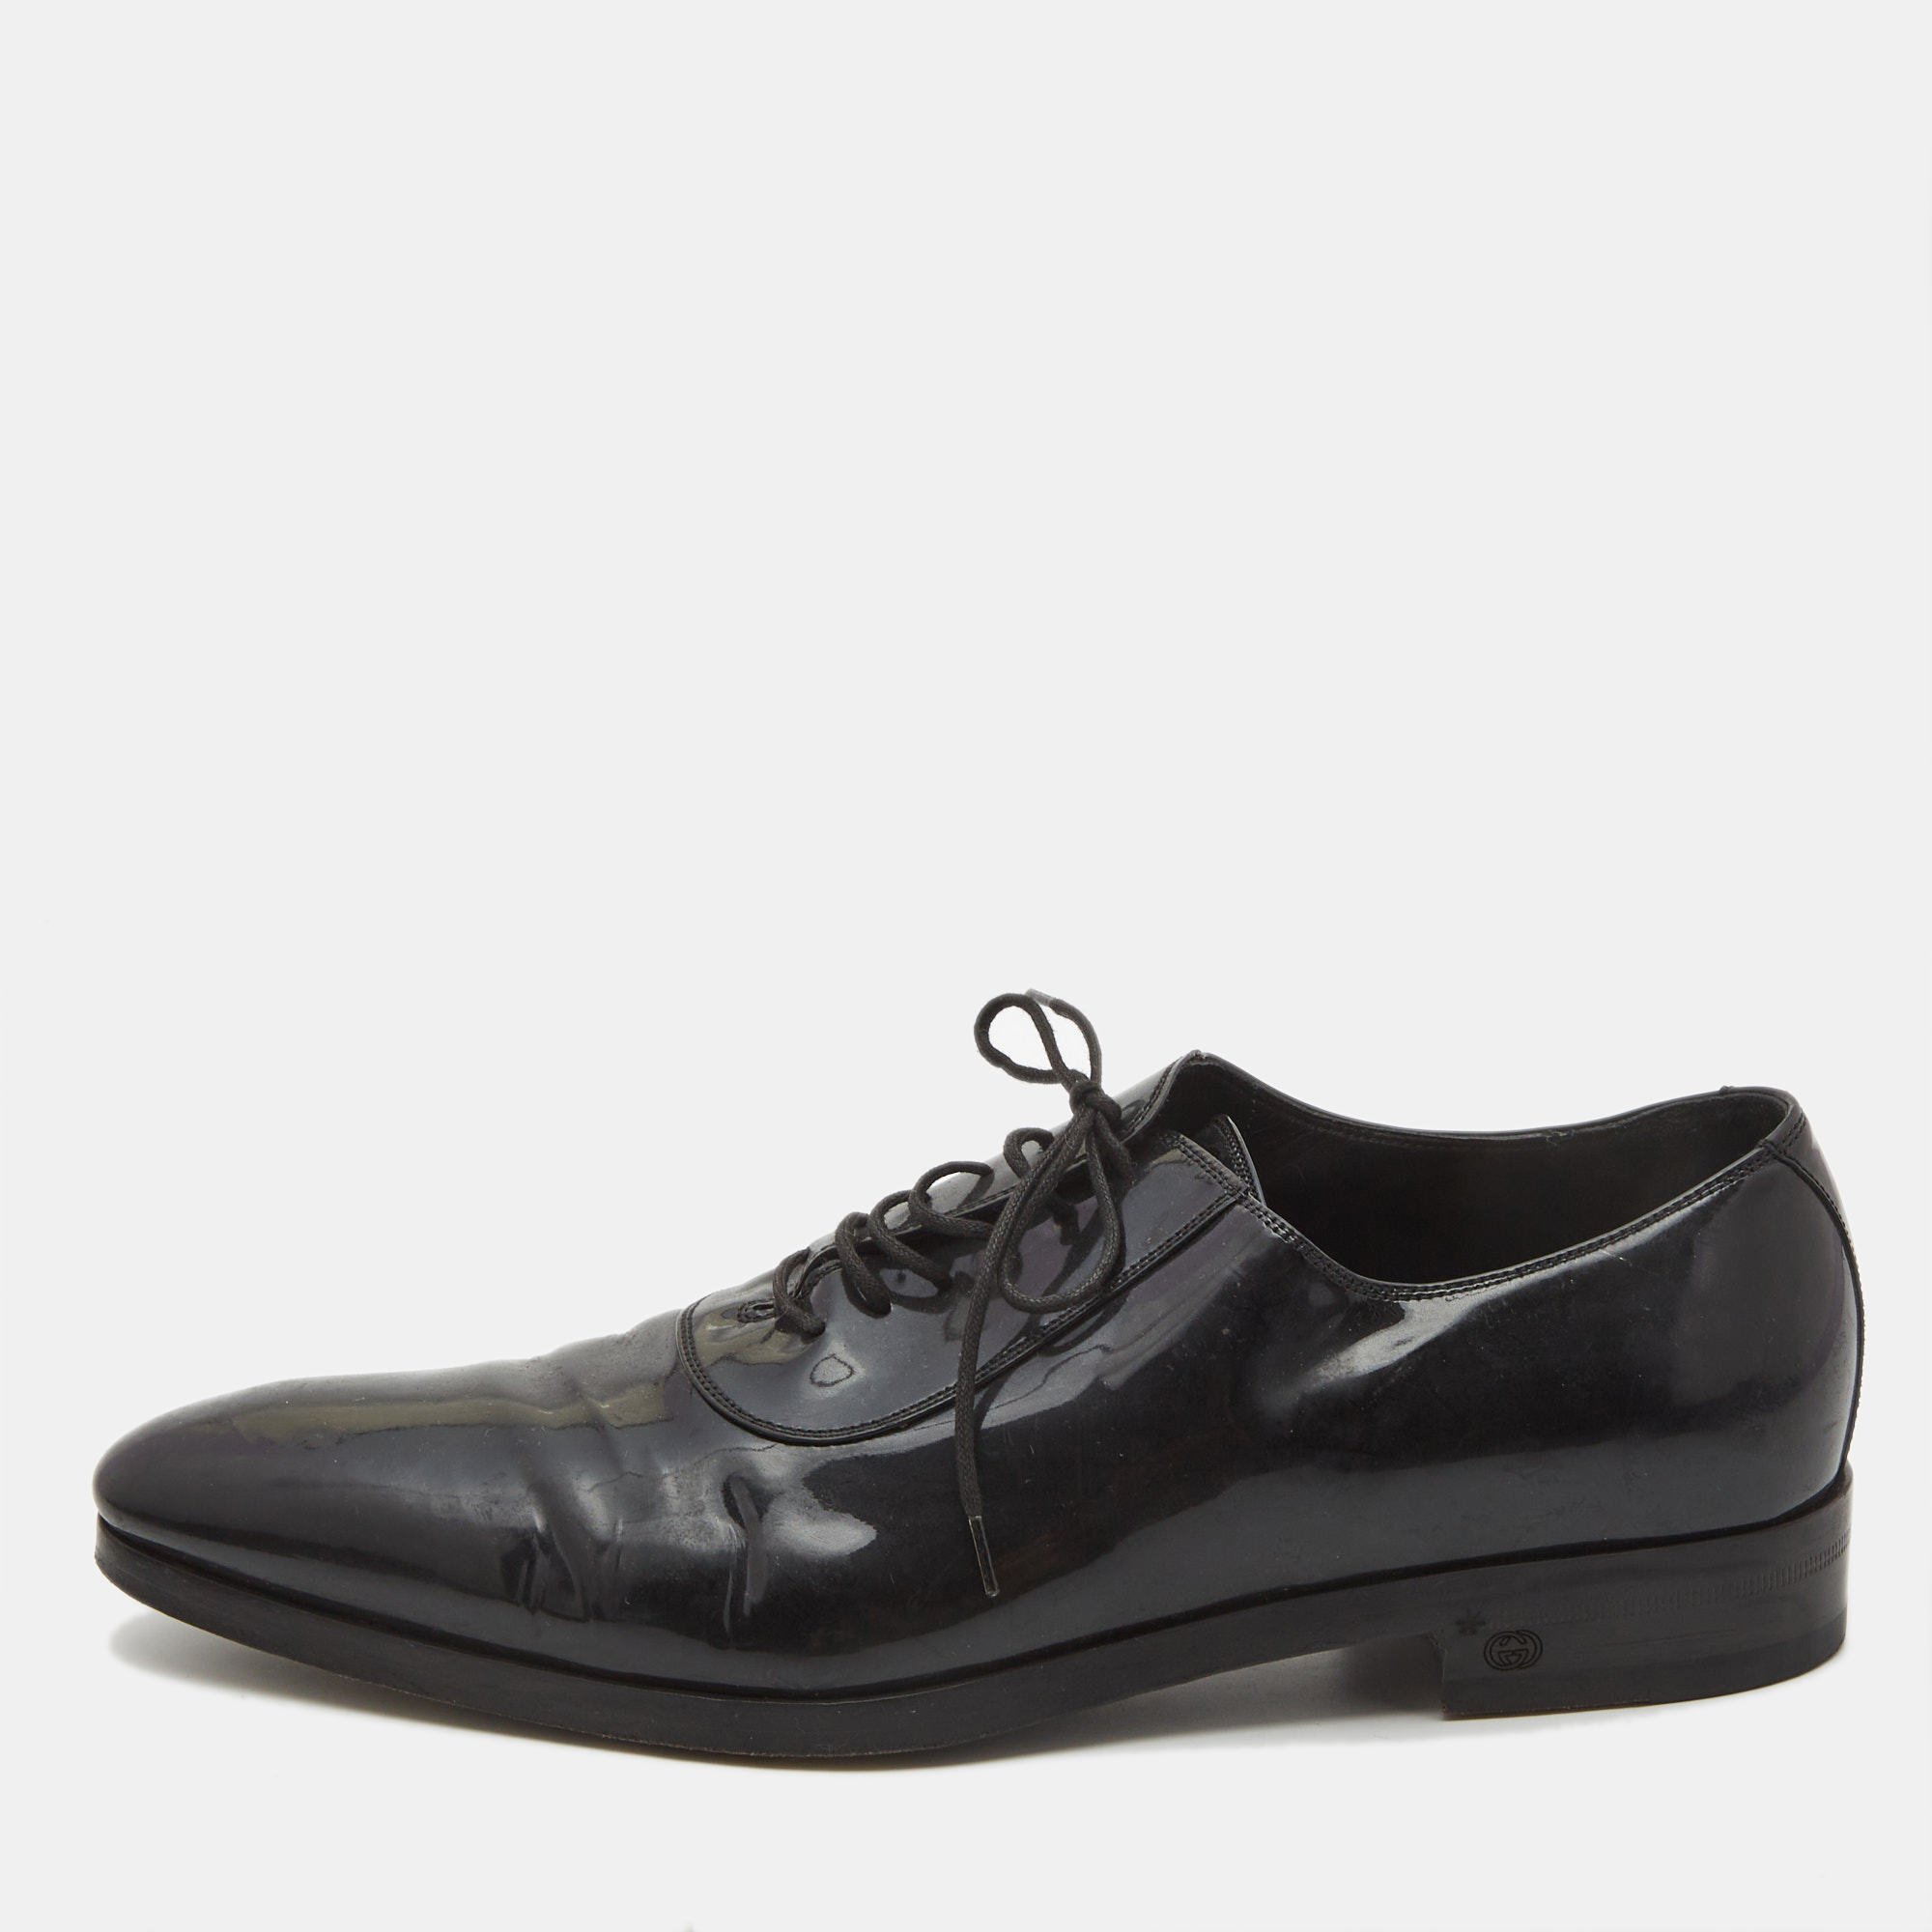 

Gucci Black Patent Leather Lace Up Oxfords Size 43